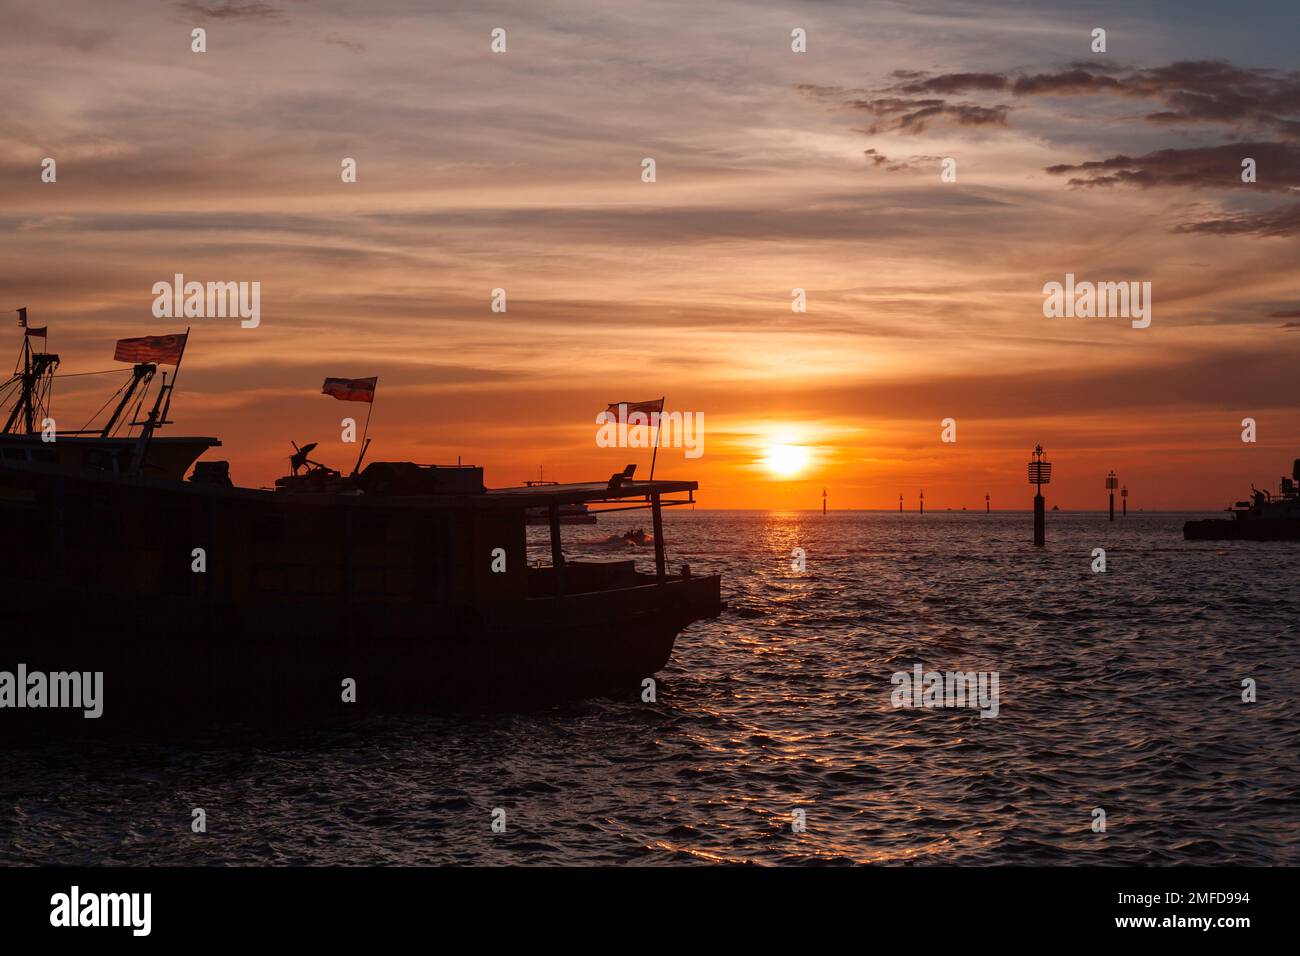 Silhouettes of fishing boats with Malaysian flags moored at KK Fish Market on a sunset Stock Photo